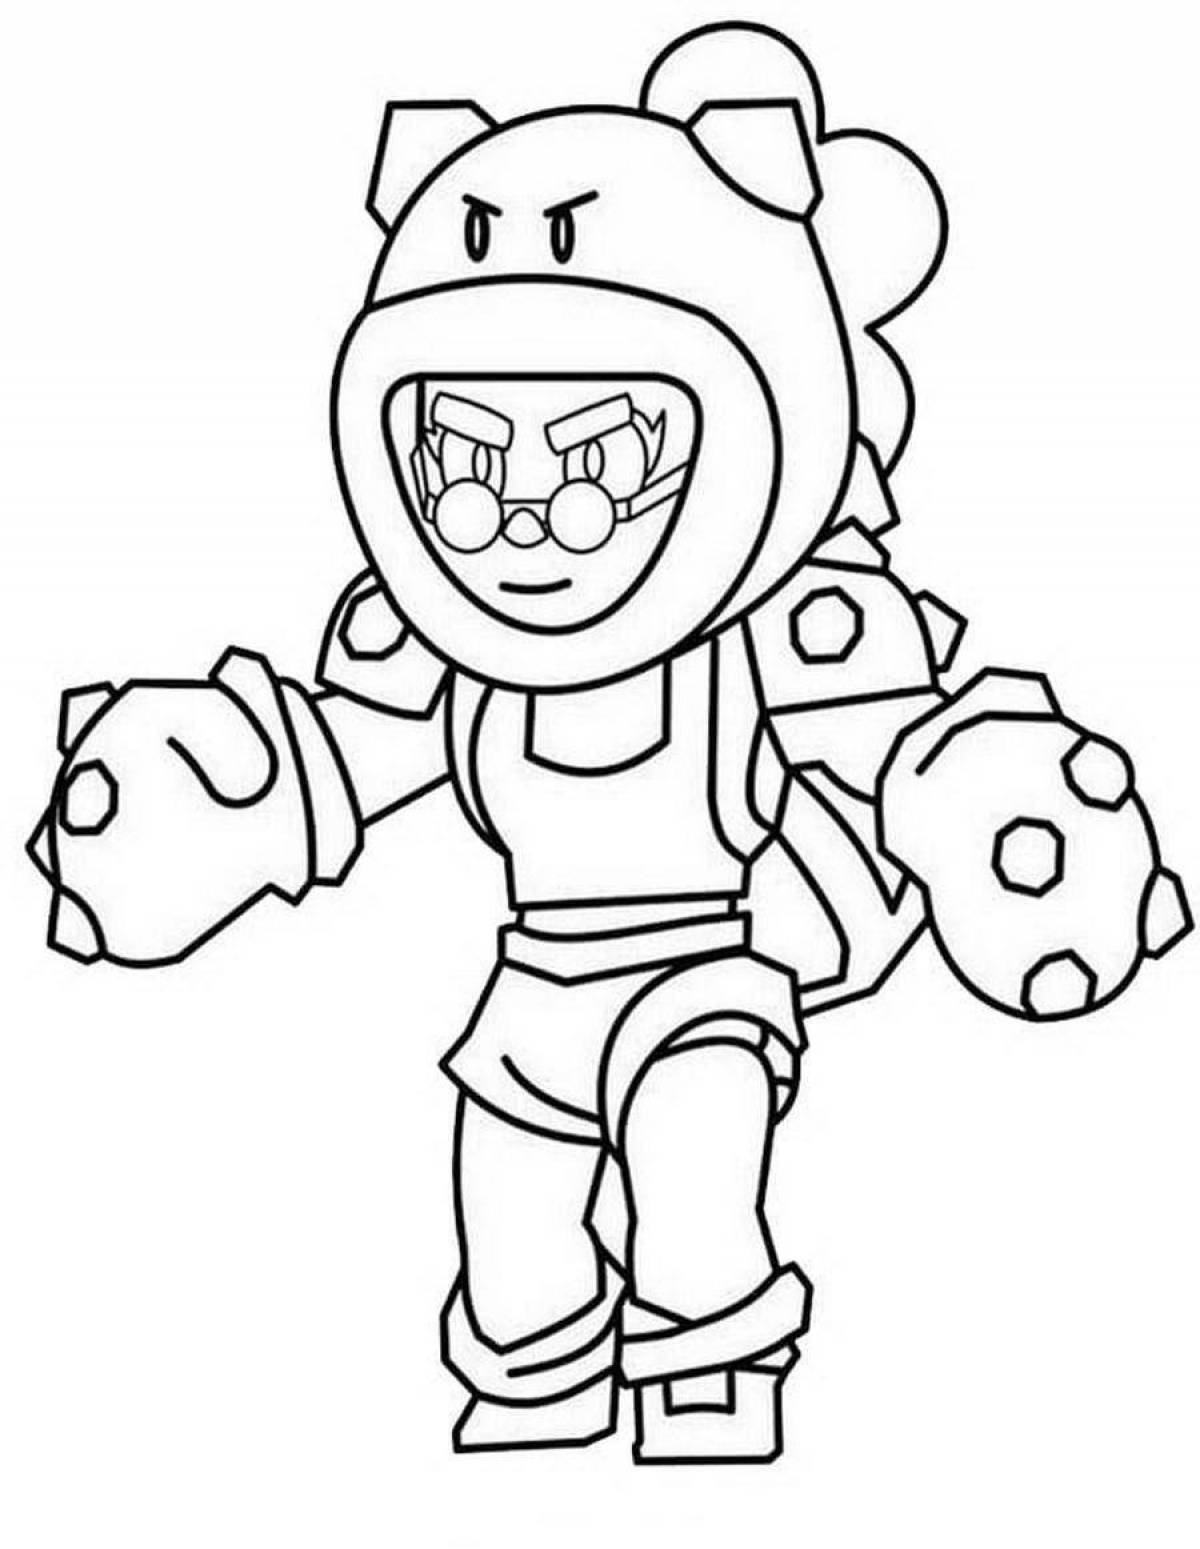 Outstanding bravo stars sandy coloring page